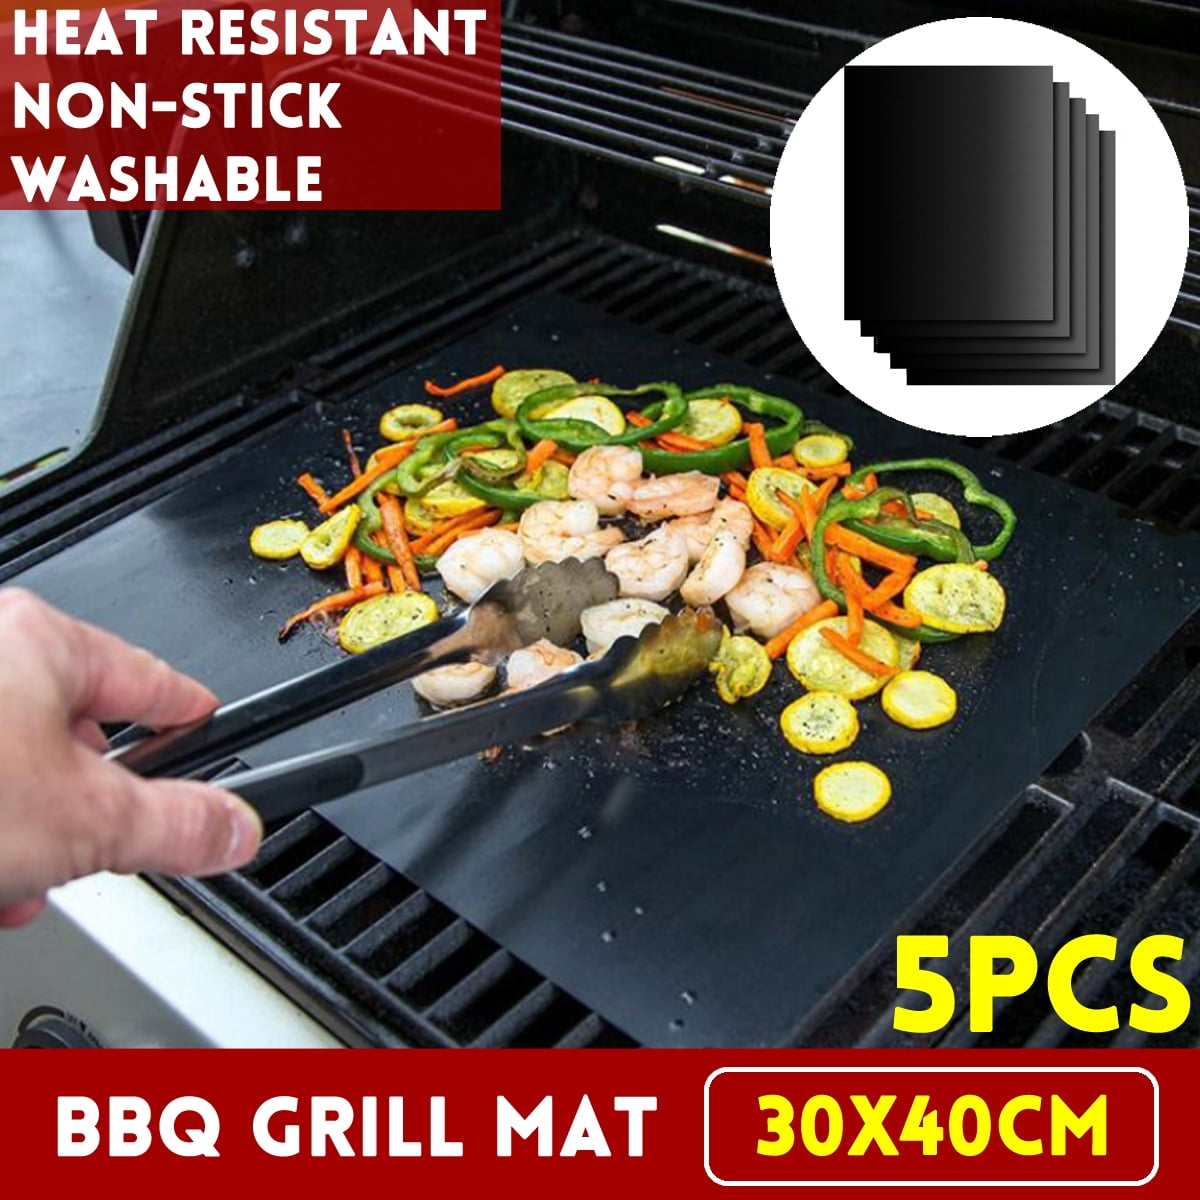 BBQ Grill Mat Barbecue outdoor Baking Non-stick Pad Reusable Cooking Heat Resist 